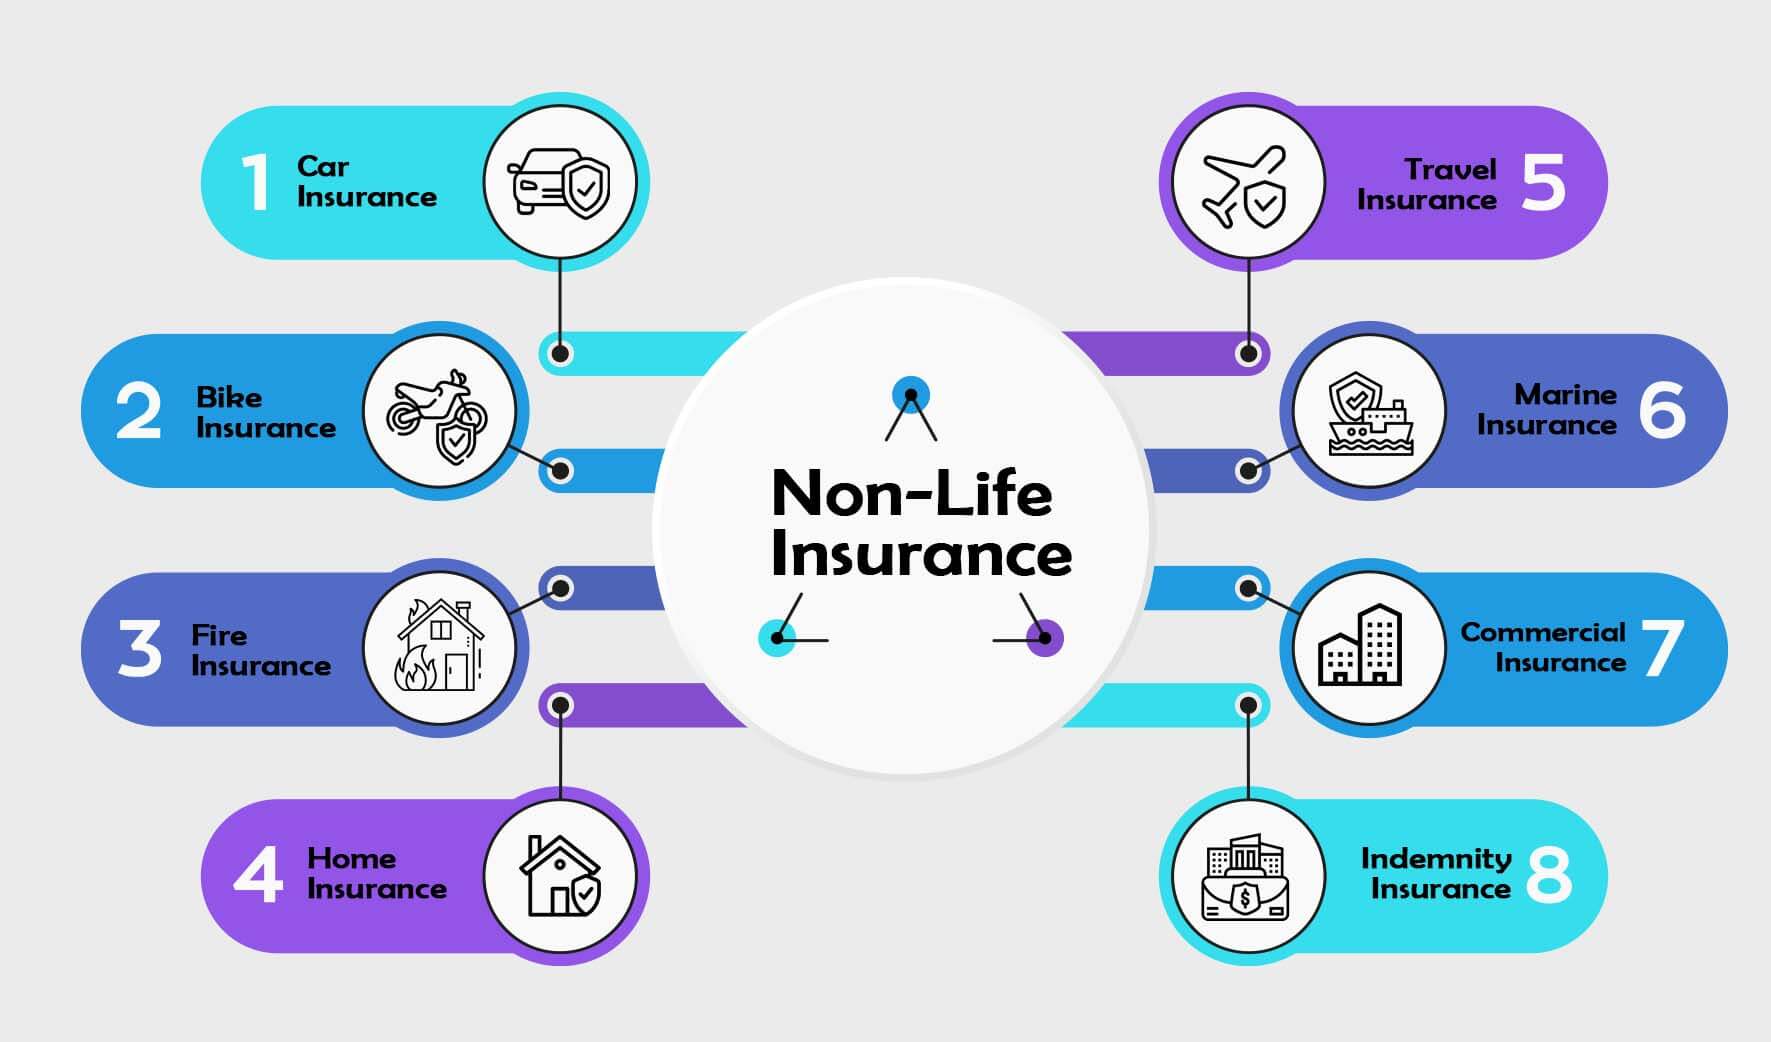 Non-Life Insurance Policy image